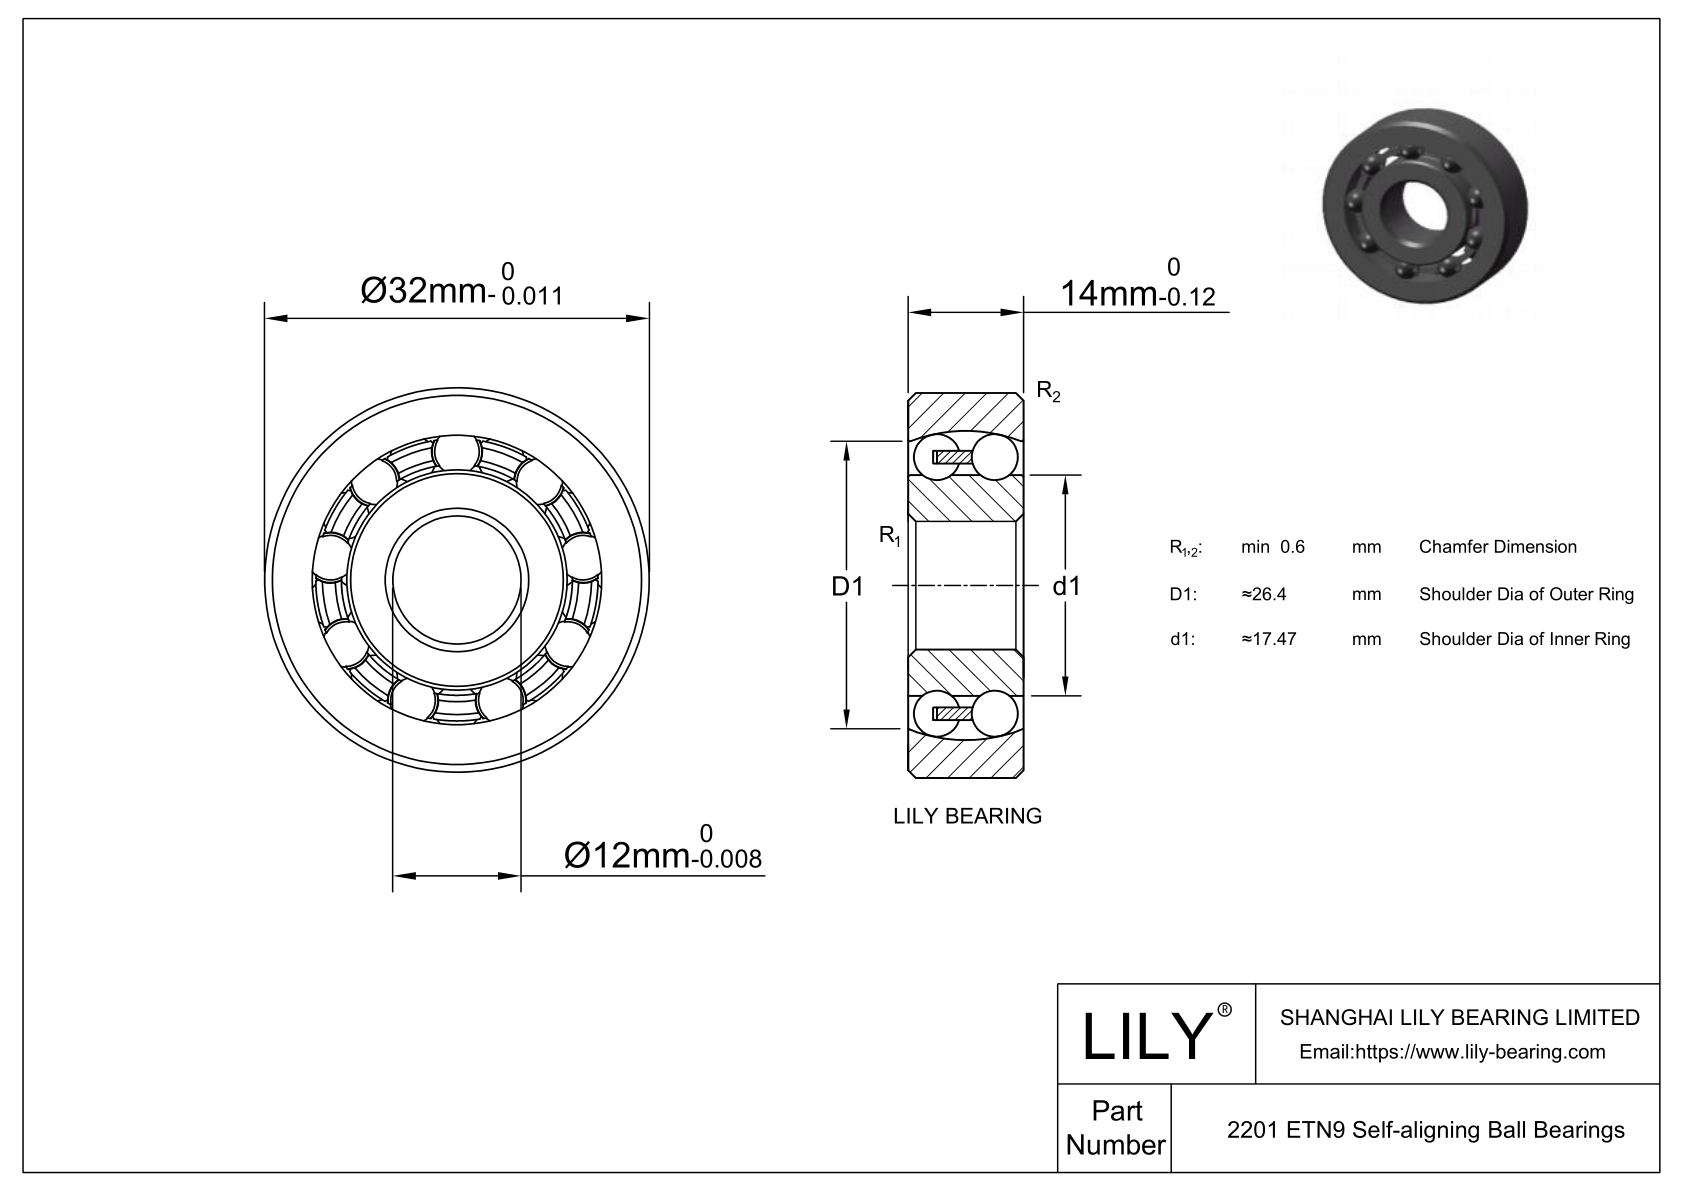 CE2201SI Silicon Nitride Self Aligning Ball Bearings cad drawing